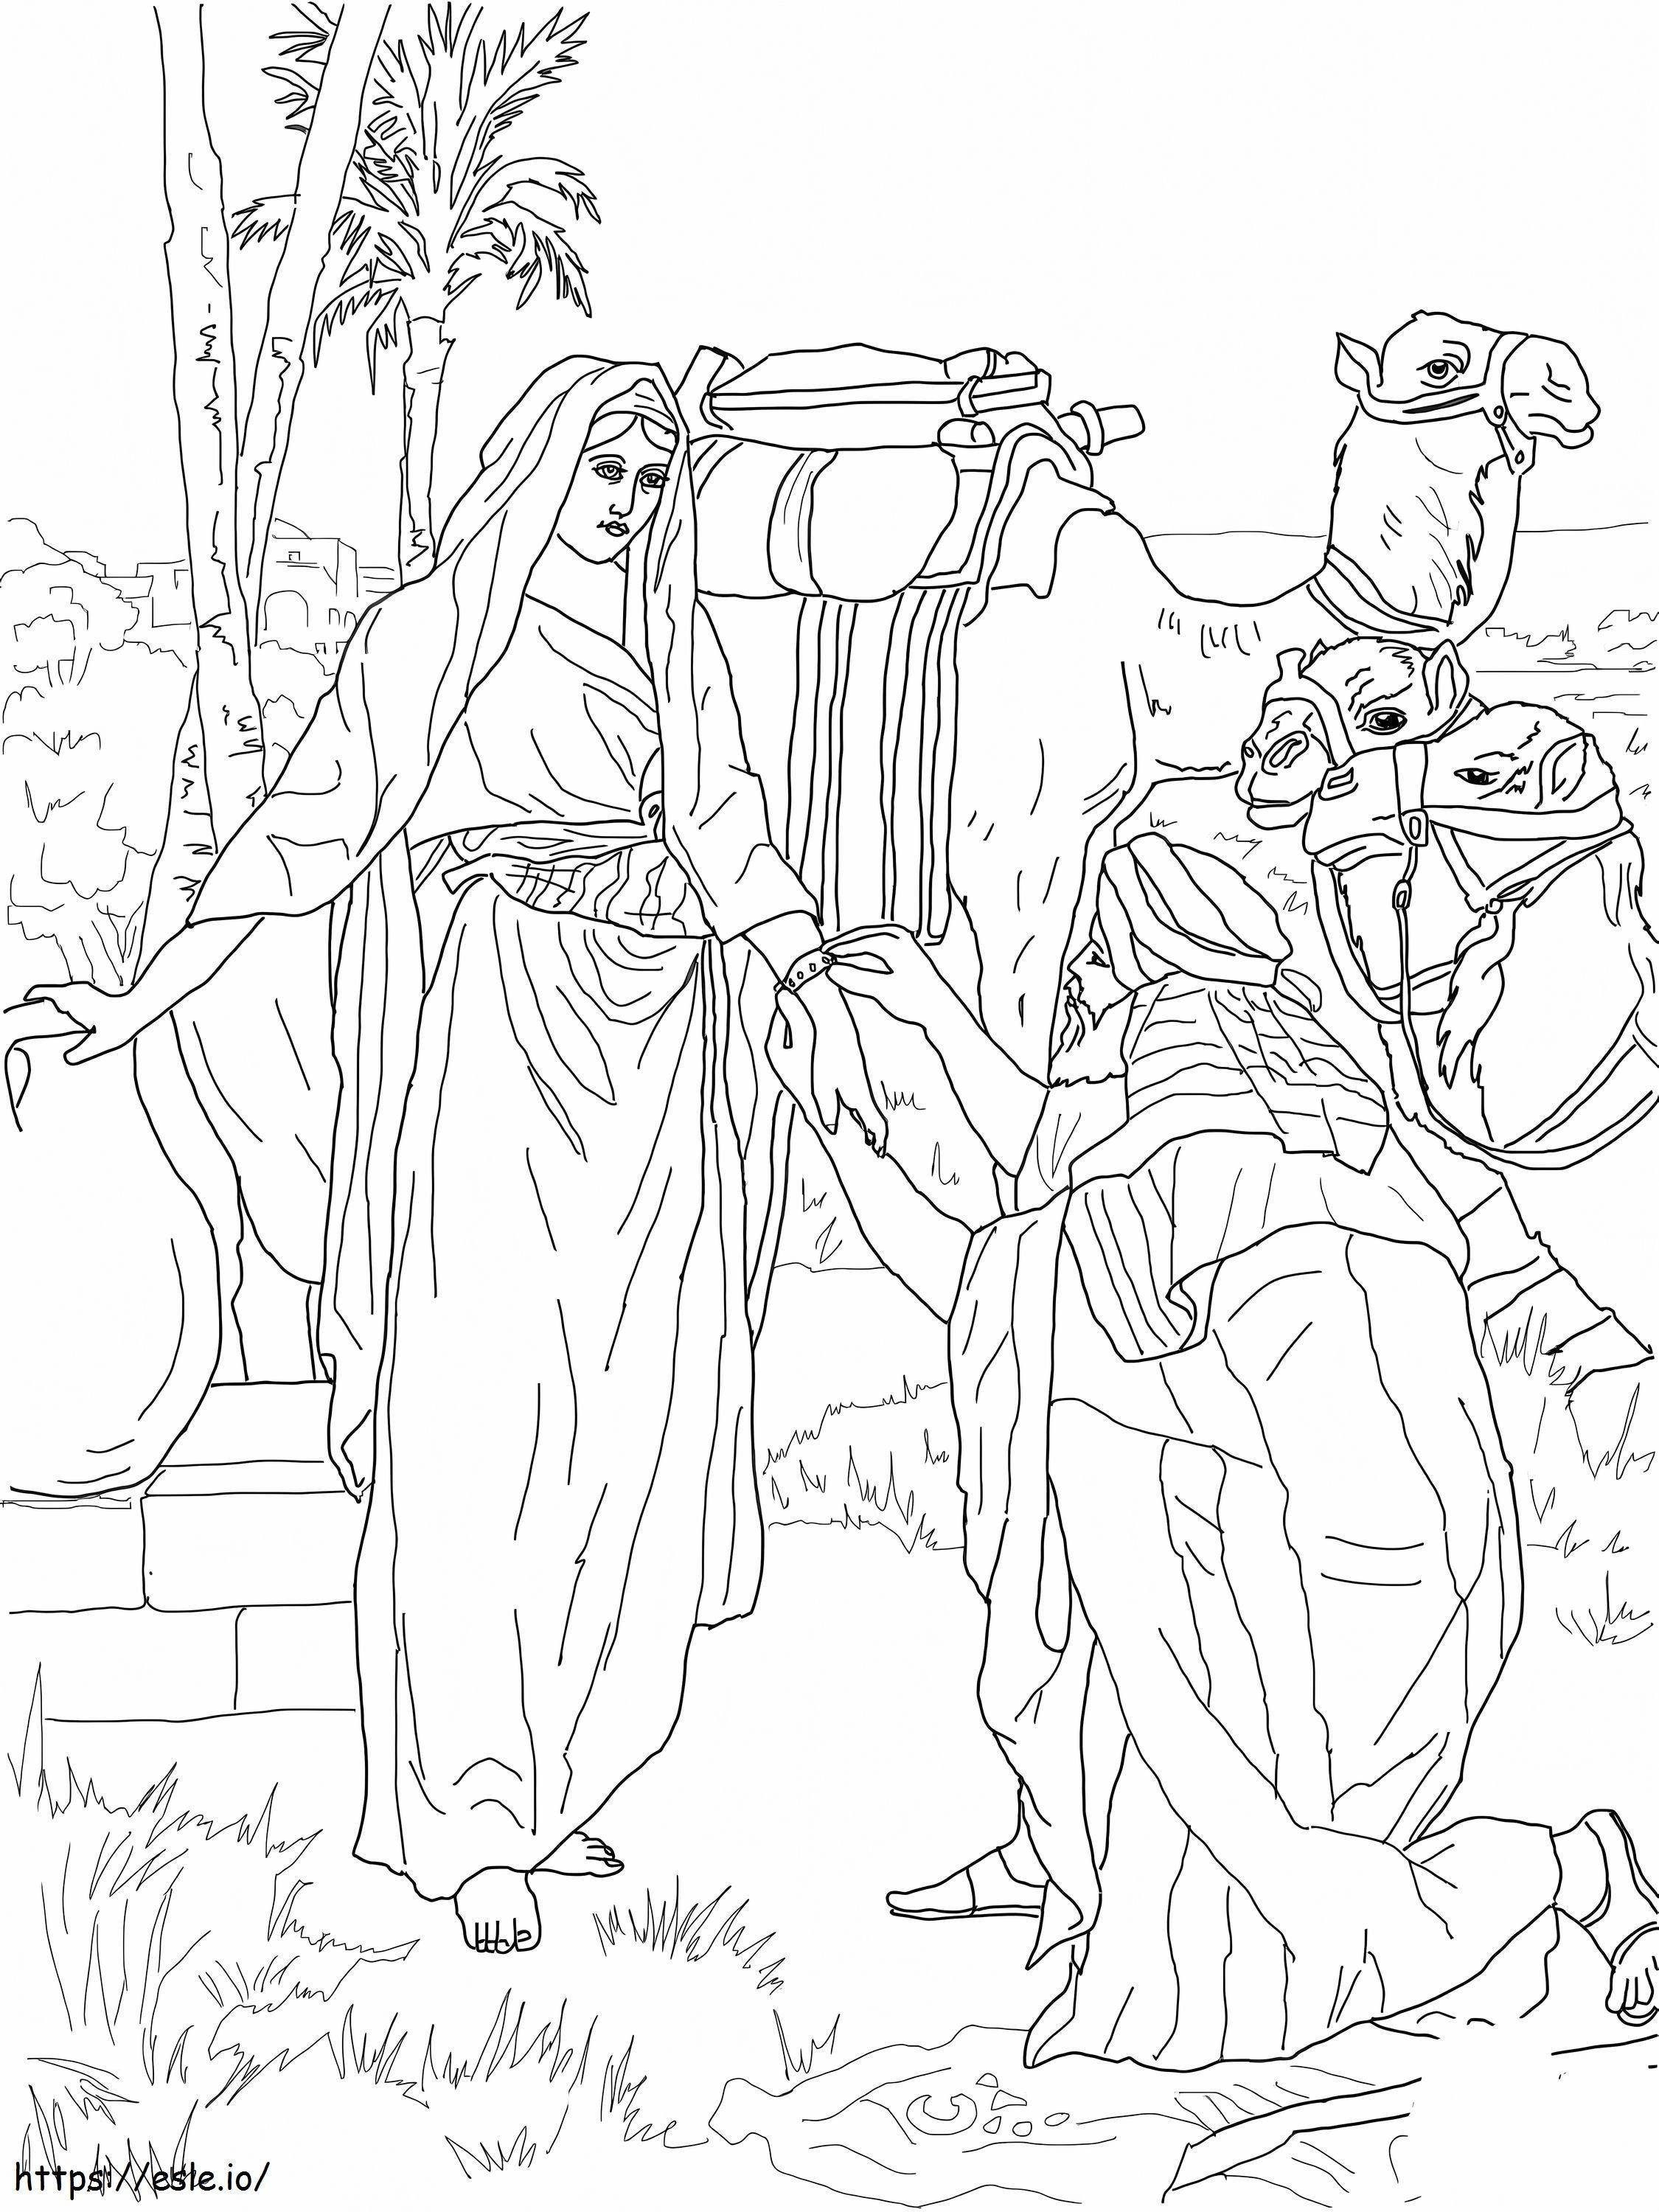 Free Moses Image To Color coloring page